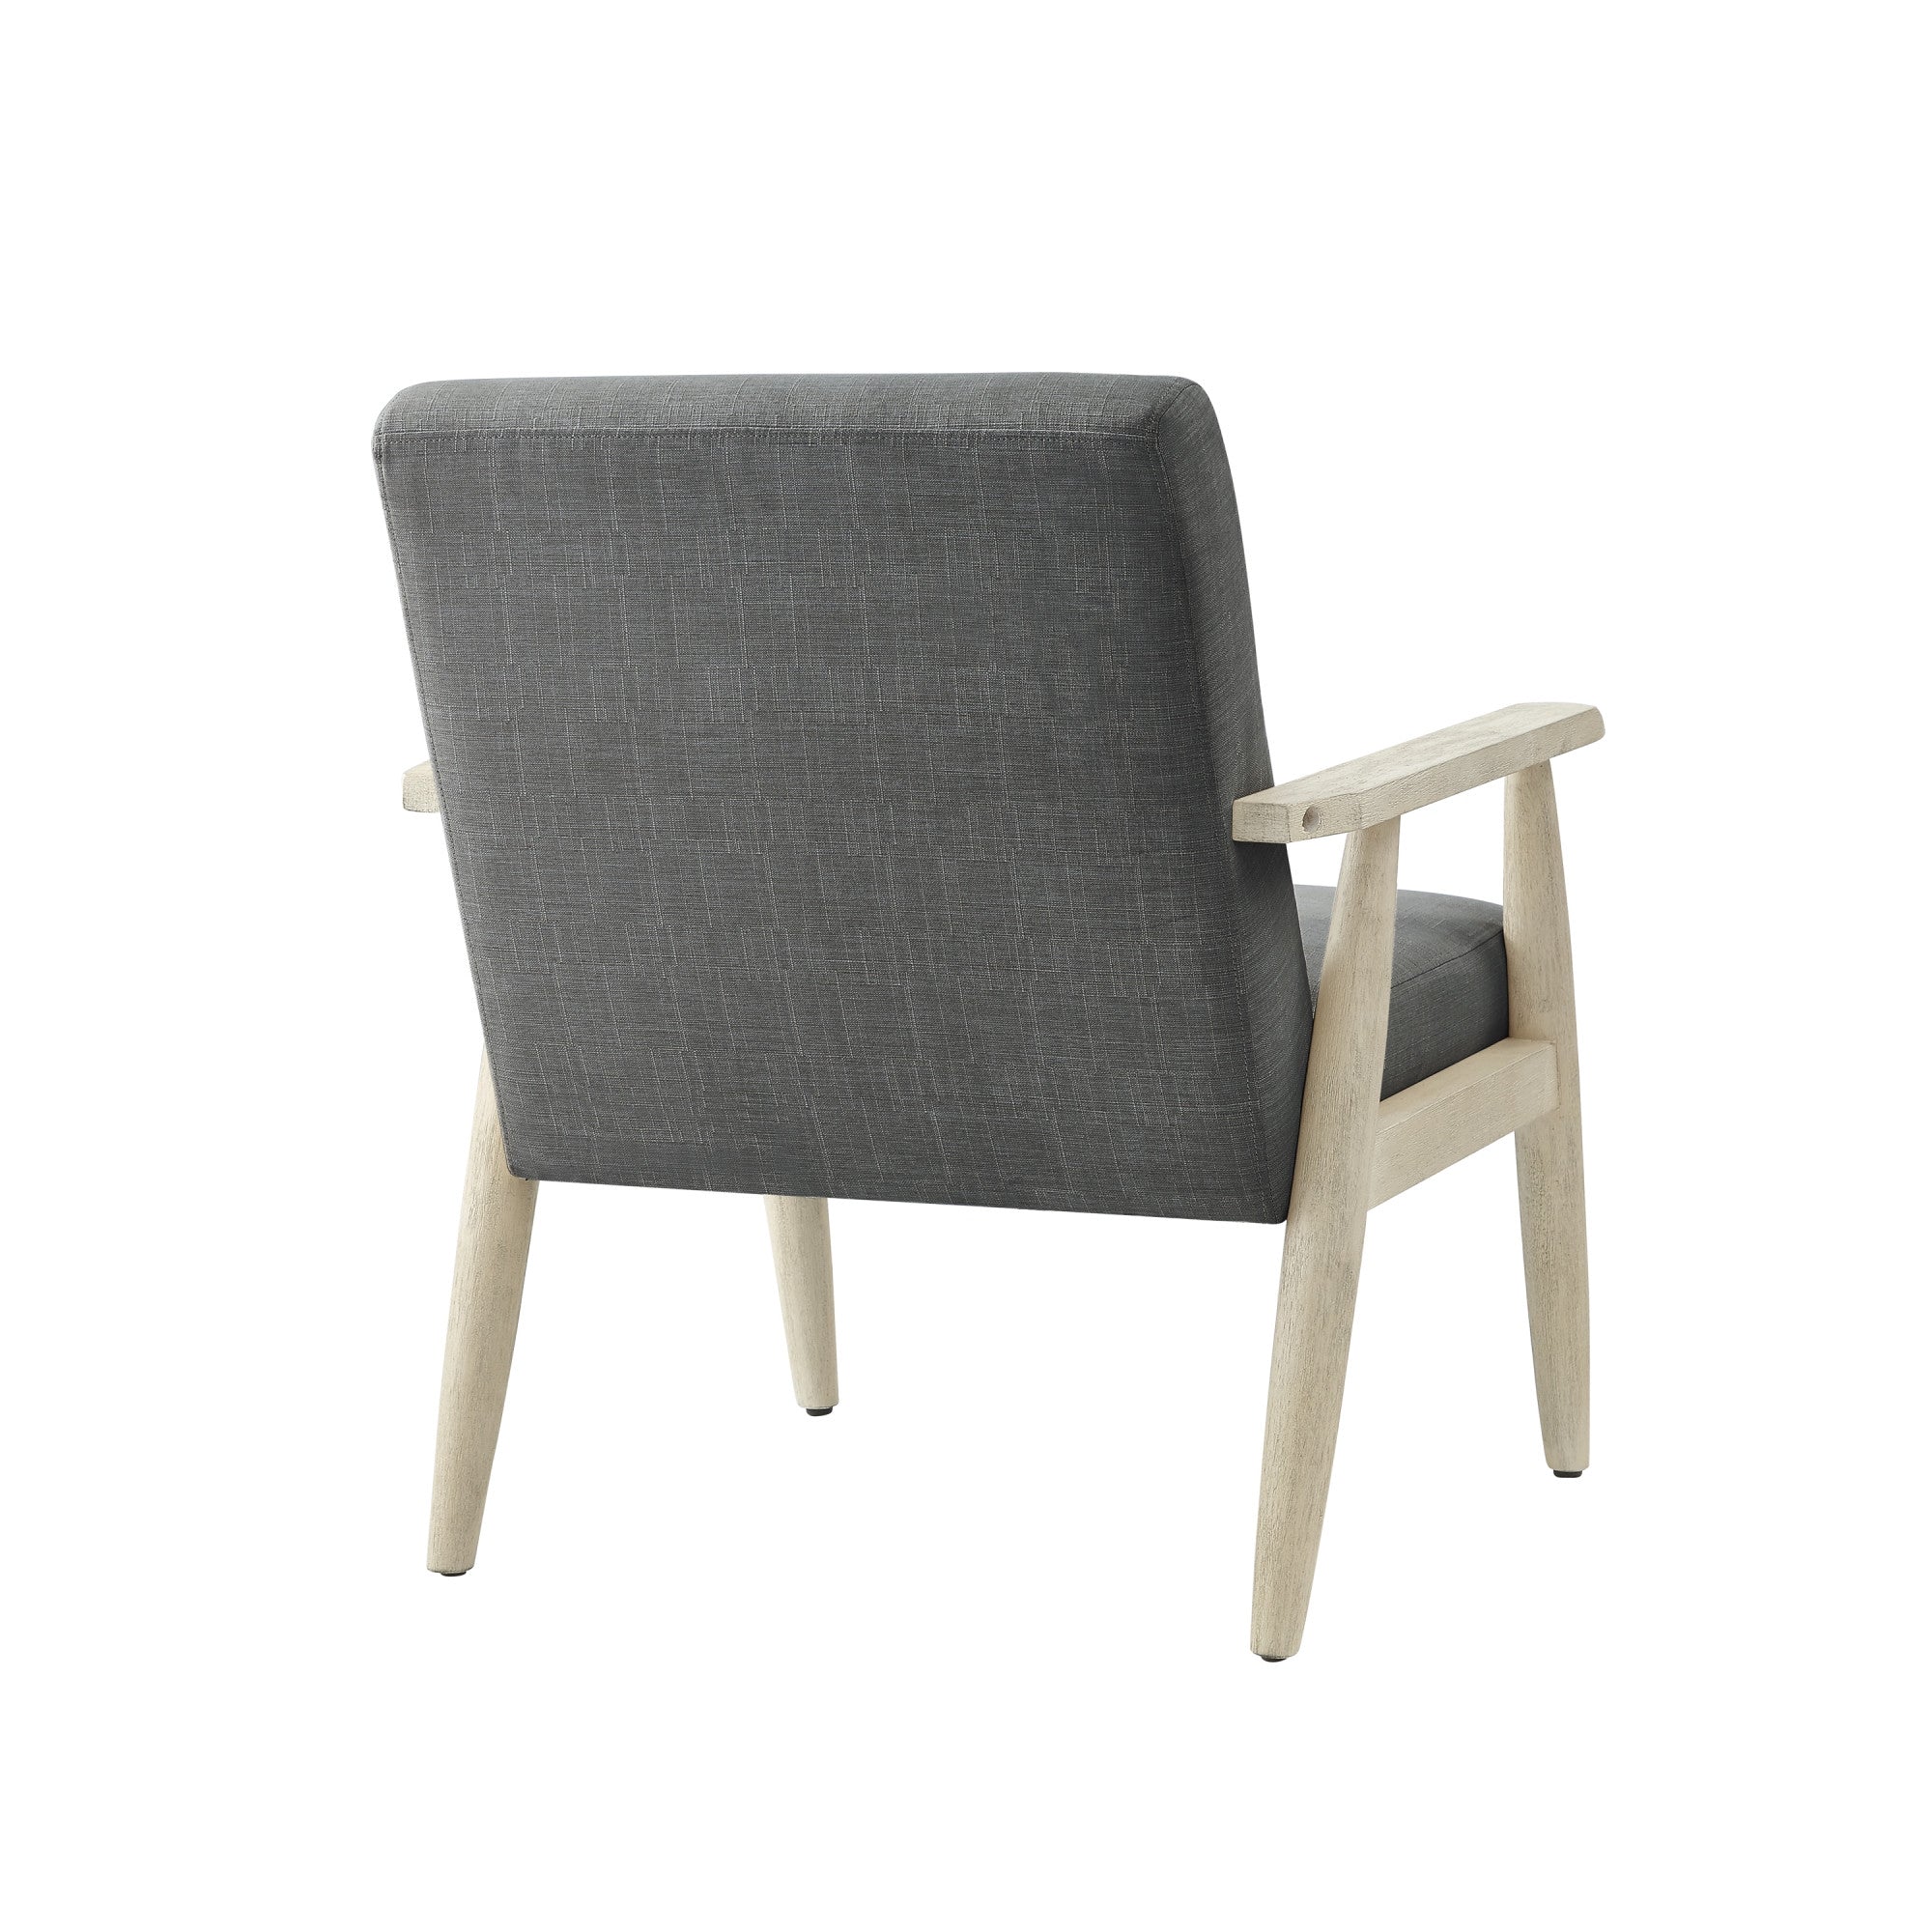 30" Charcoal And Cream Linen Arm Chair